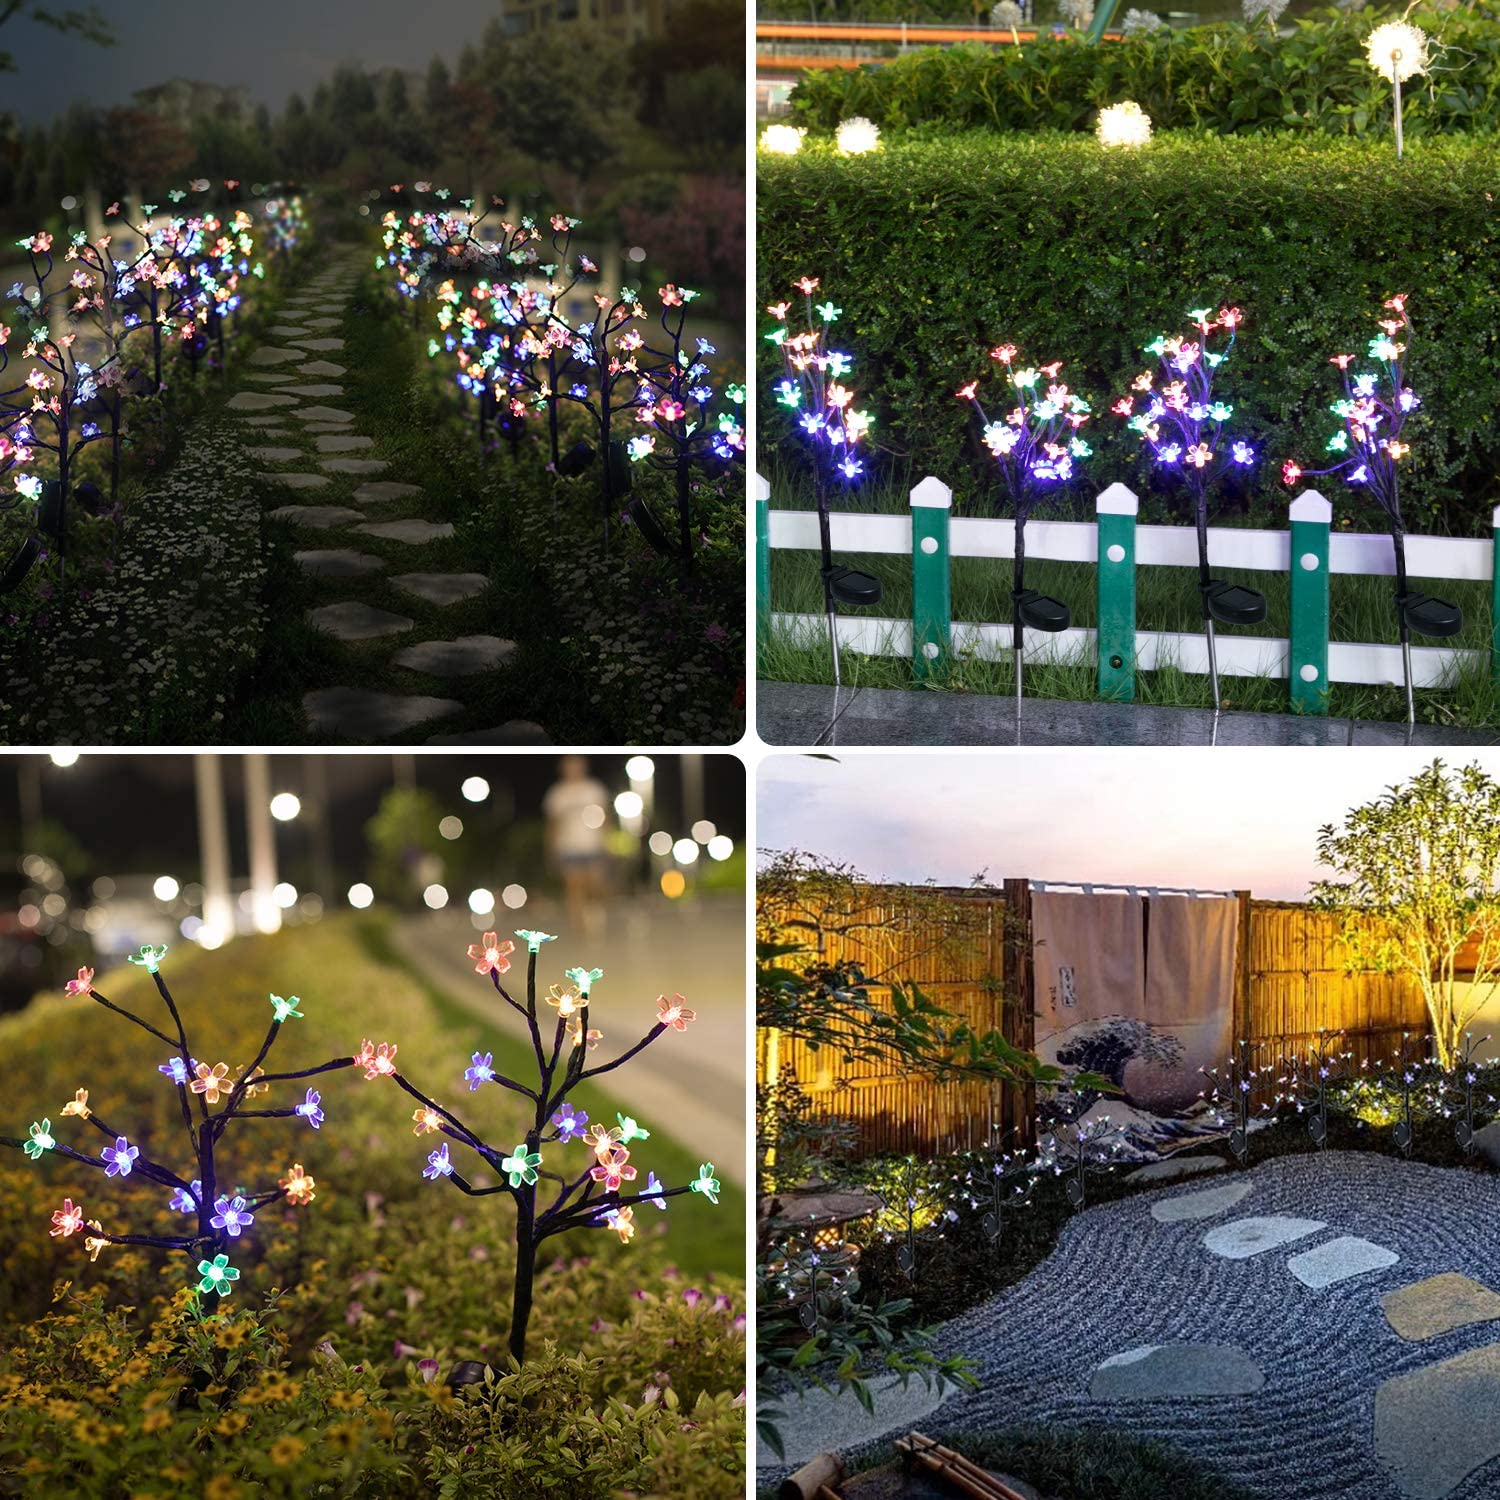 Solar Flower Lights with 20 Cherry Blossom,Outdoor Solar Lights, 2 Pack Solar Fairy Lights Waterproof Multi-Color Solar Powered Garden Lights, Bigger Solar Panel for Pathway Patio Yard Christmas Decor - image 5 of 8